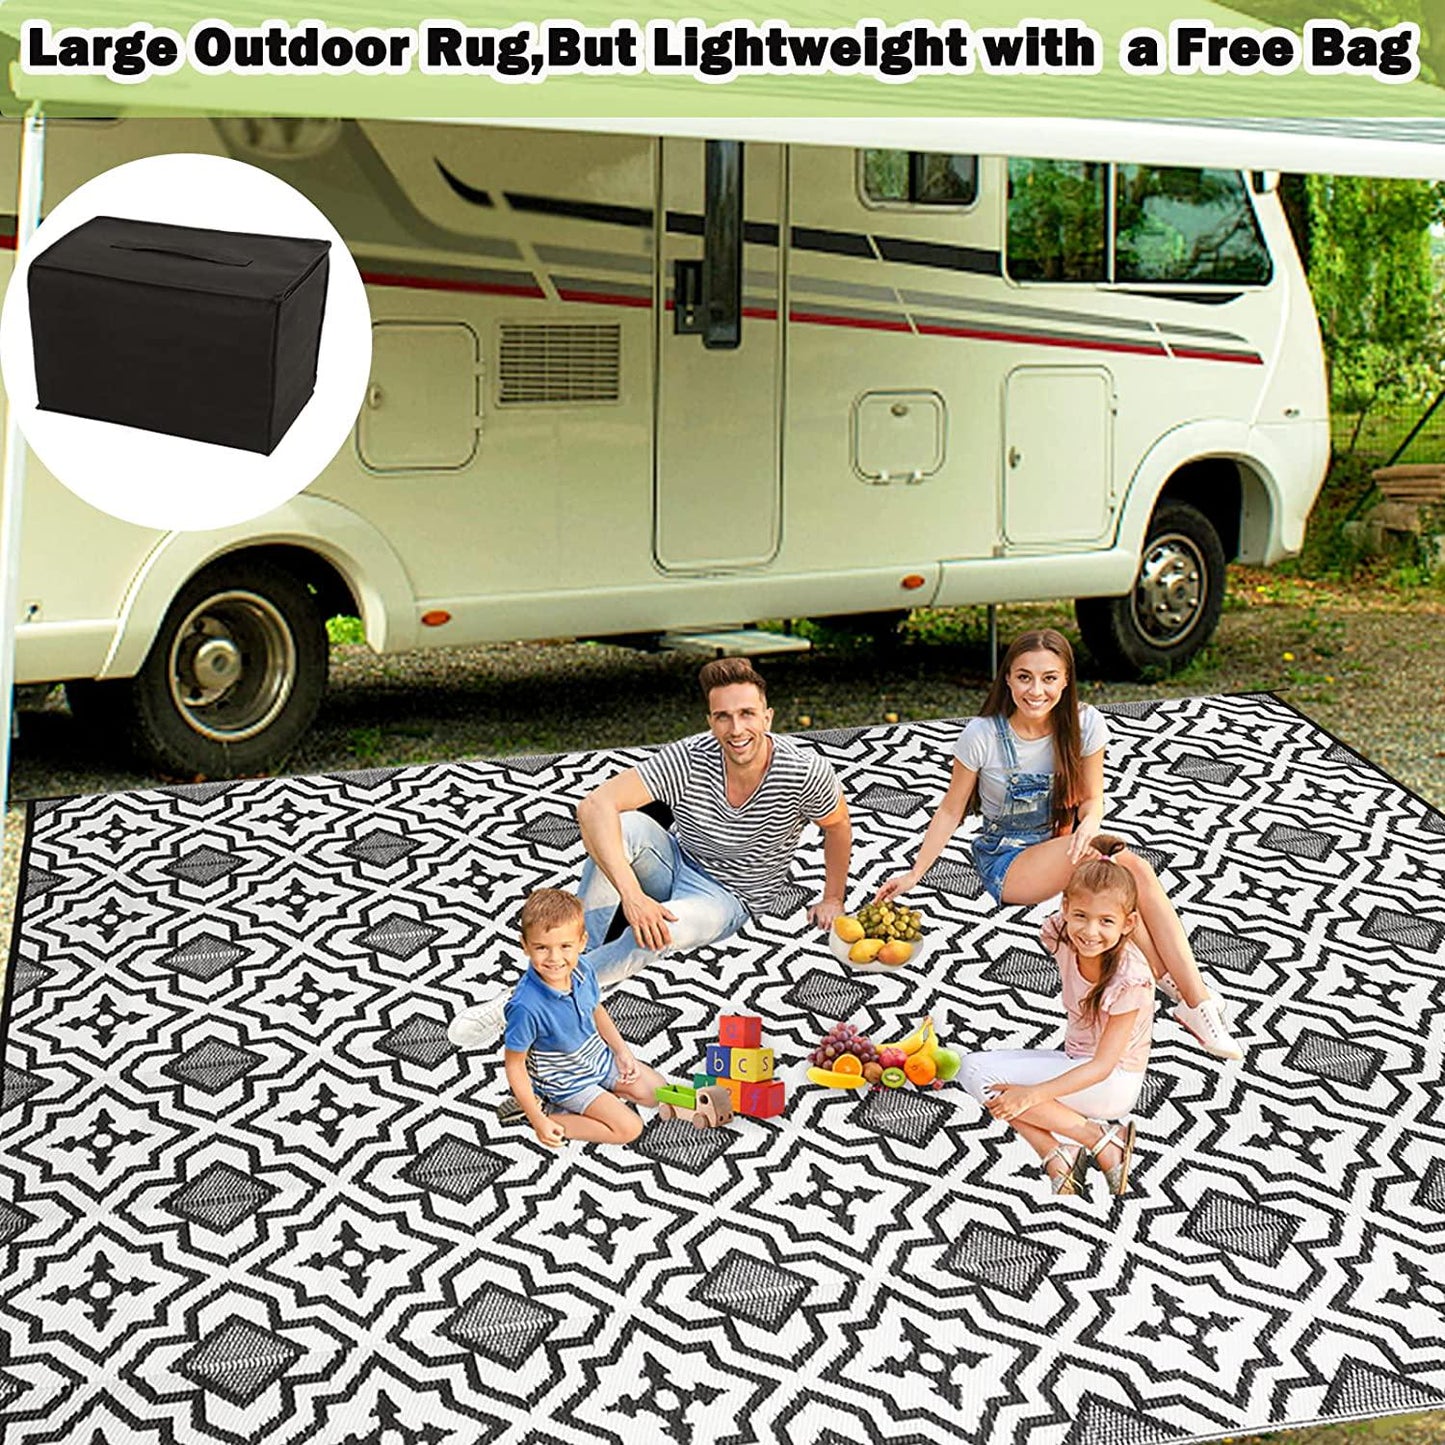 Patio Rugs Outdoor 9x12 Clearance Waterproof Camping Rugs For Outside Your Rv Outdoor Plastic Straw Rug Deck Rugs Patio Mat Outside